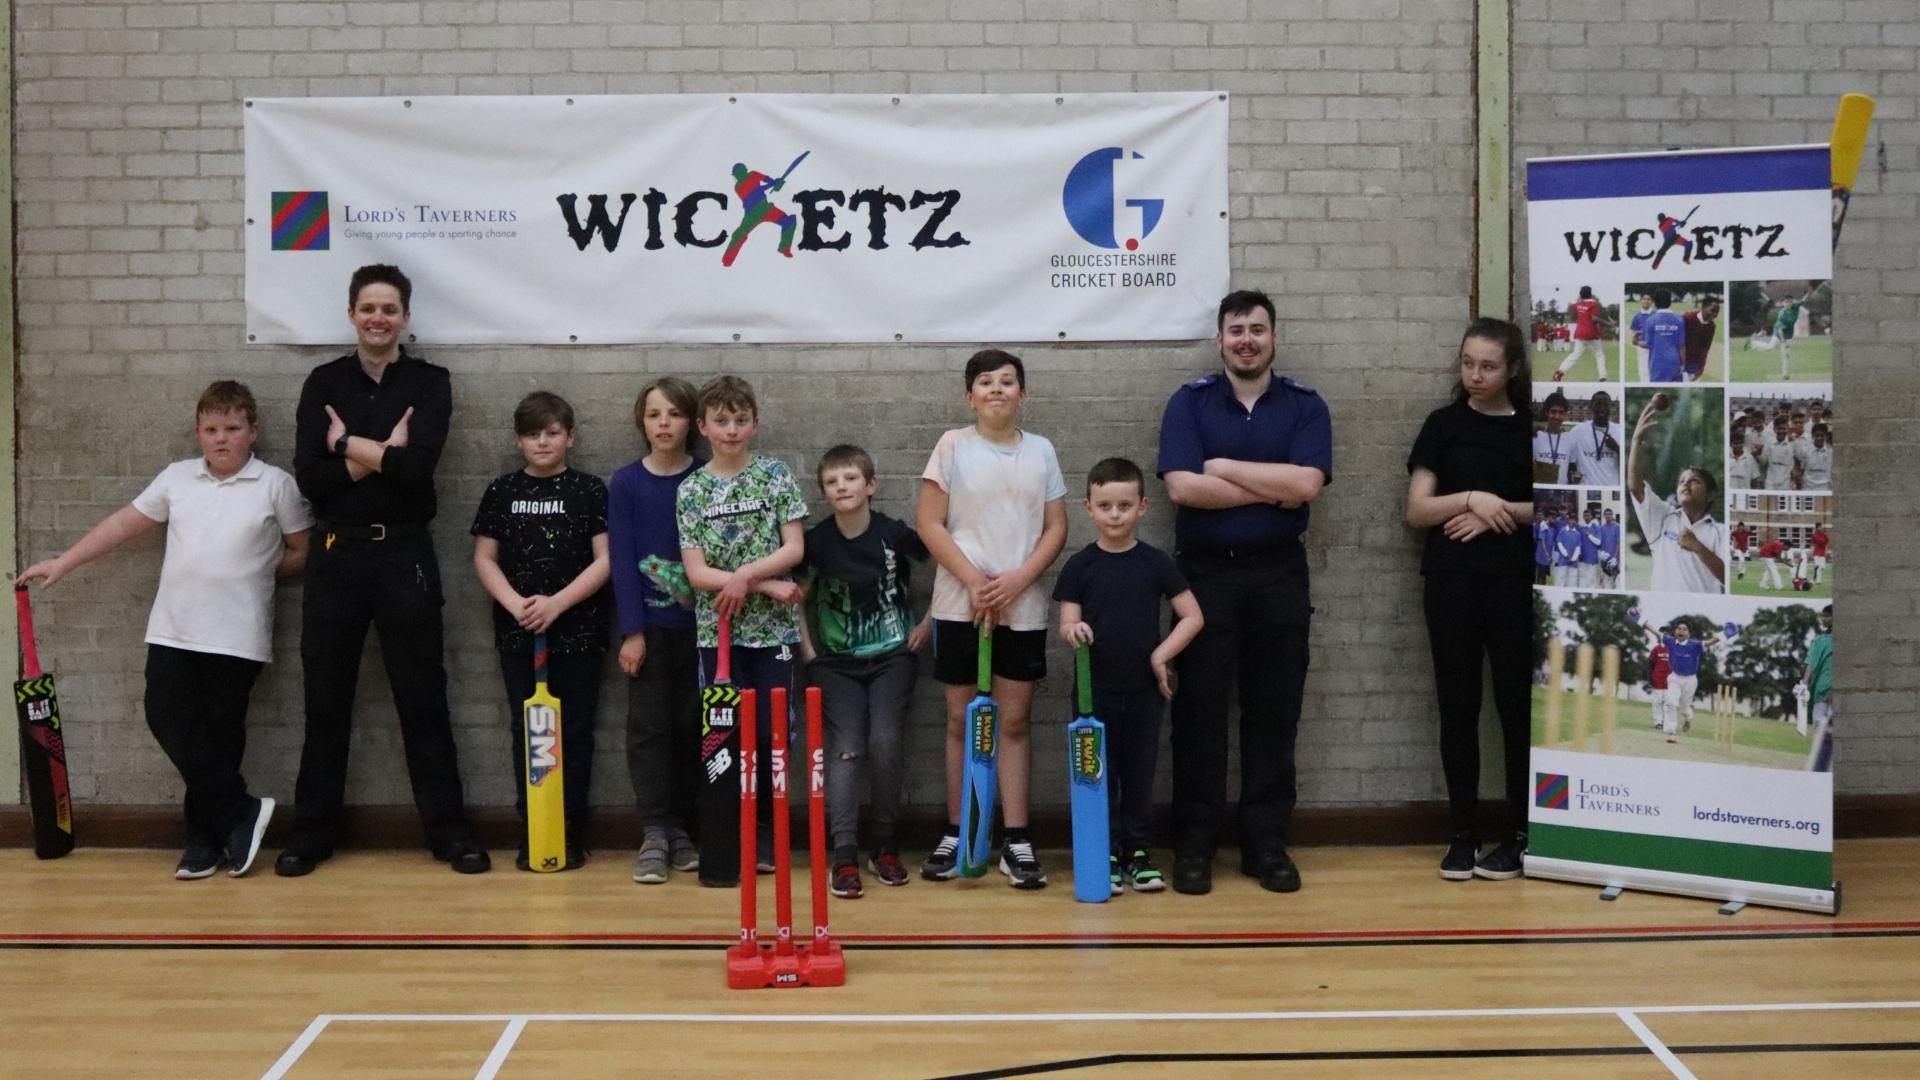 Wicketz participants photo with the police